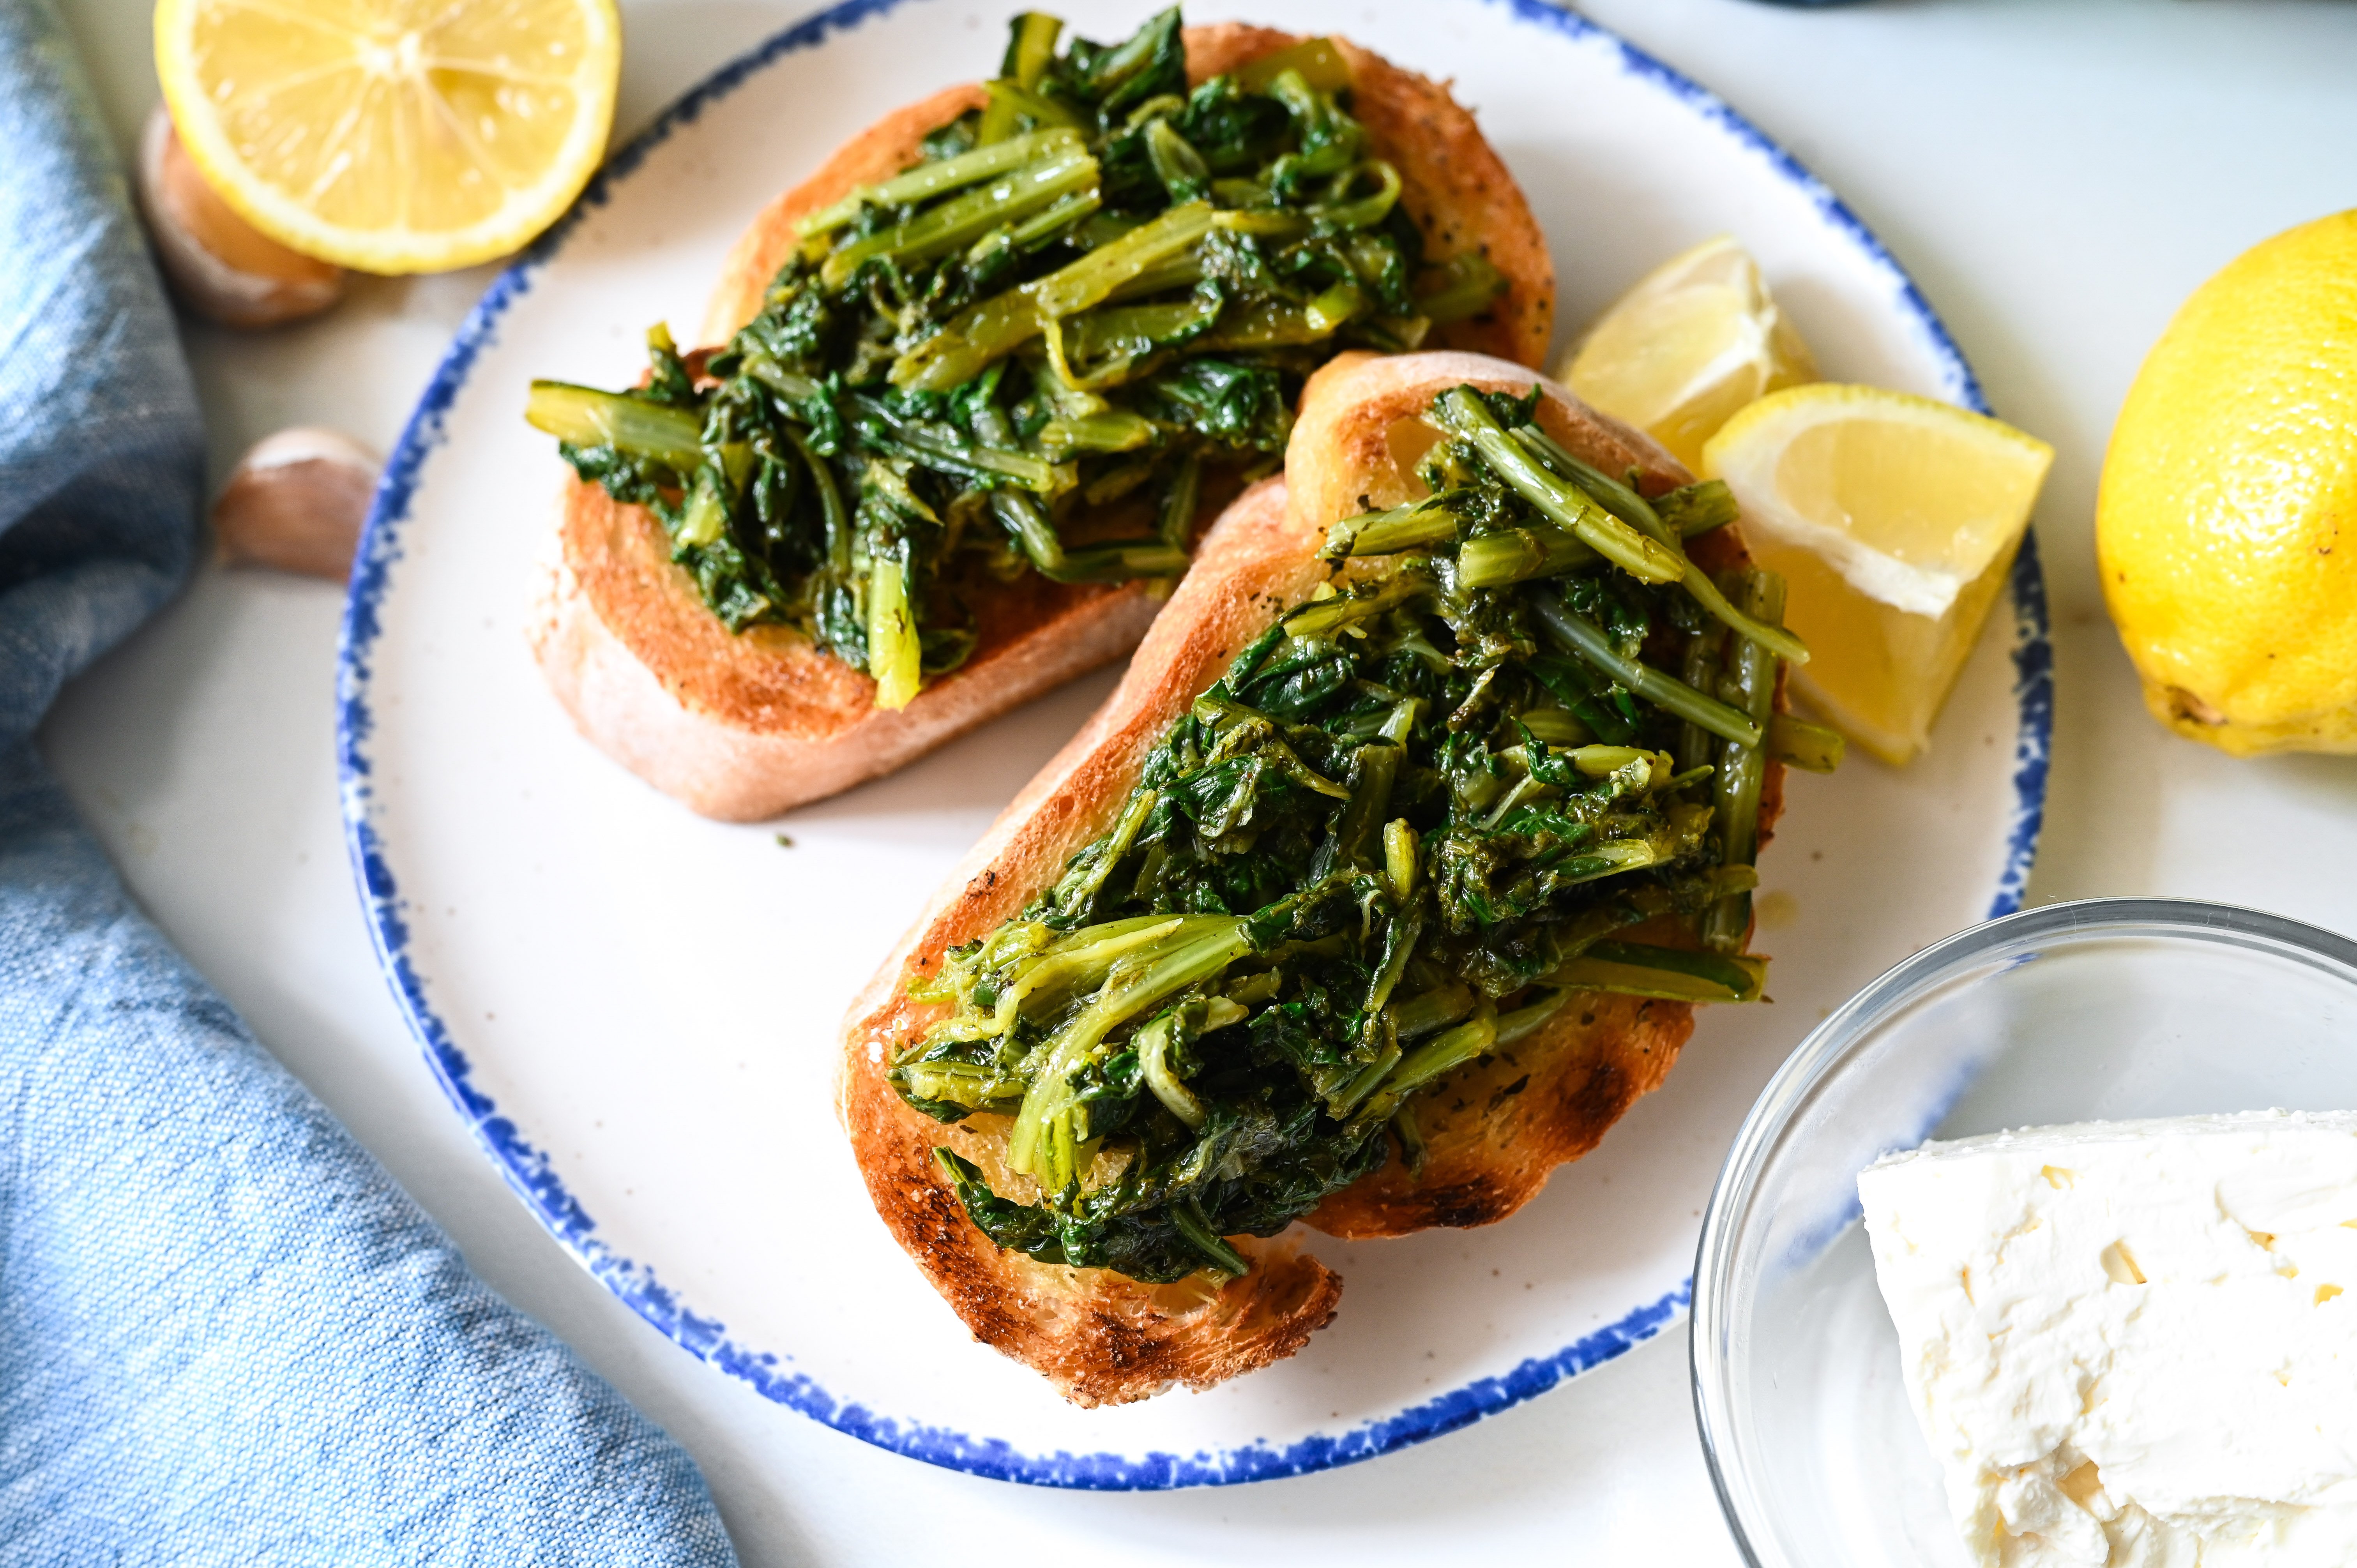 Dandelion greens and grilled bread